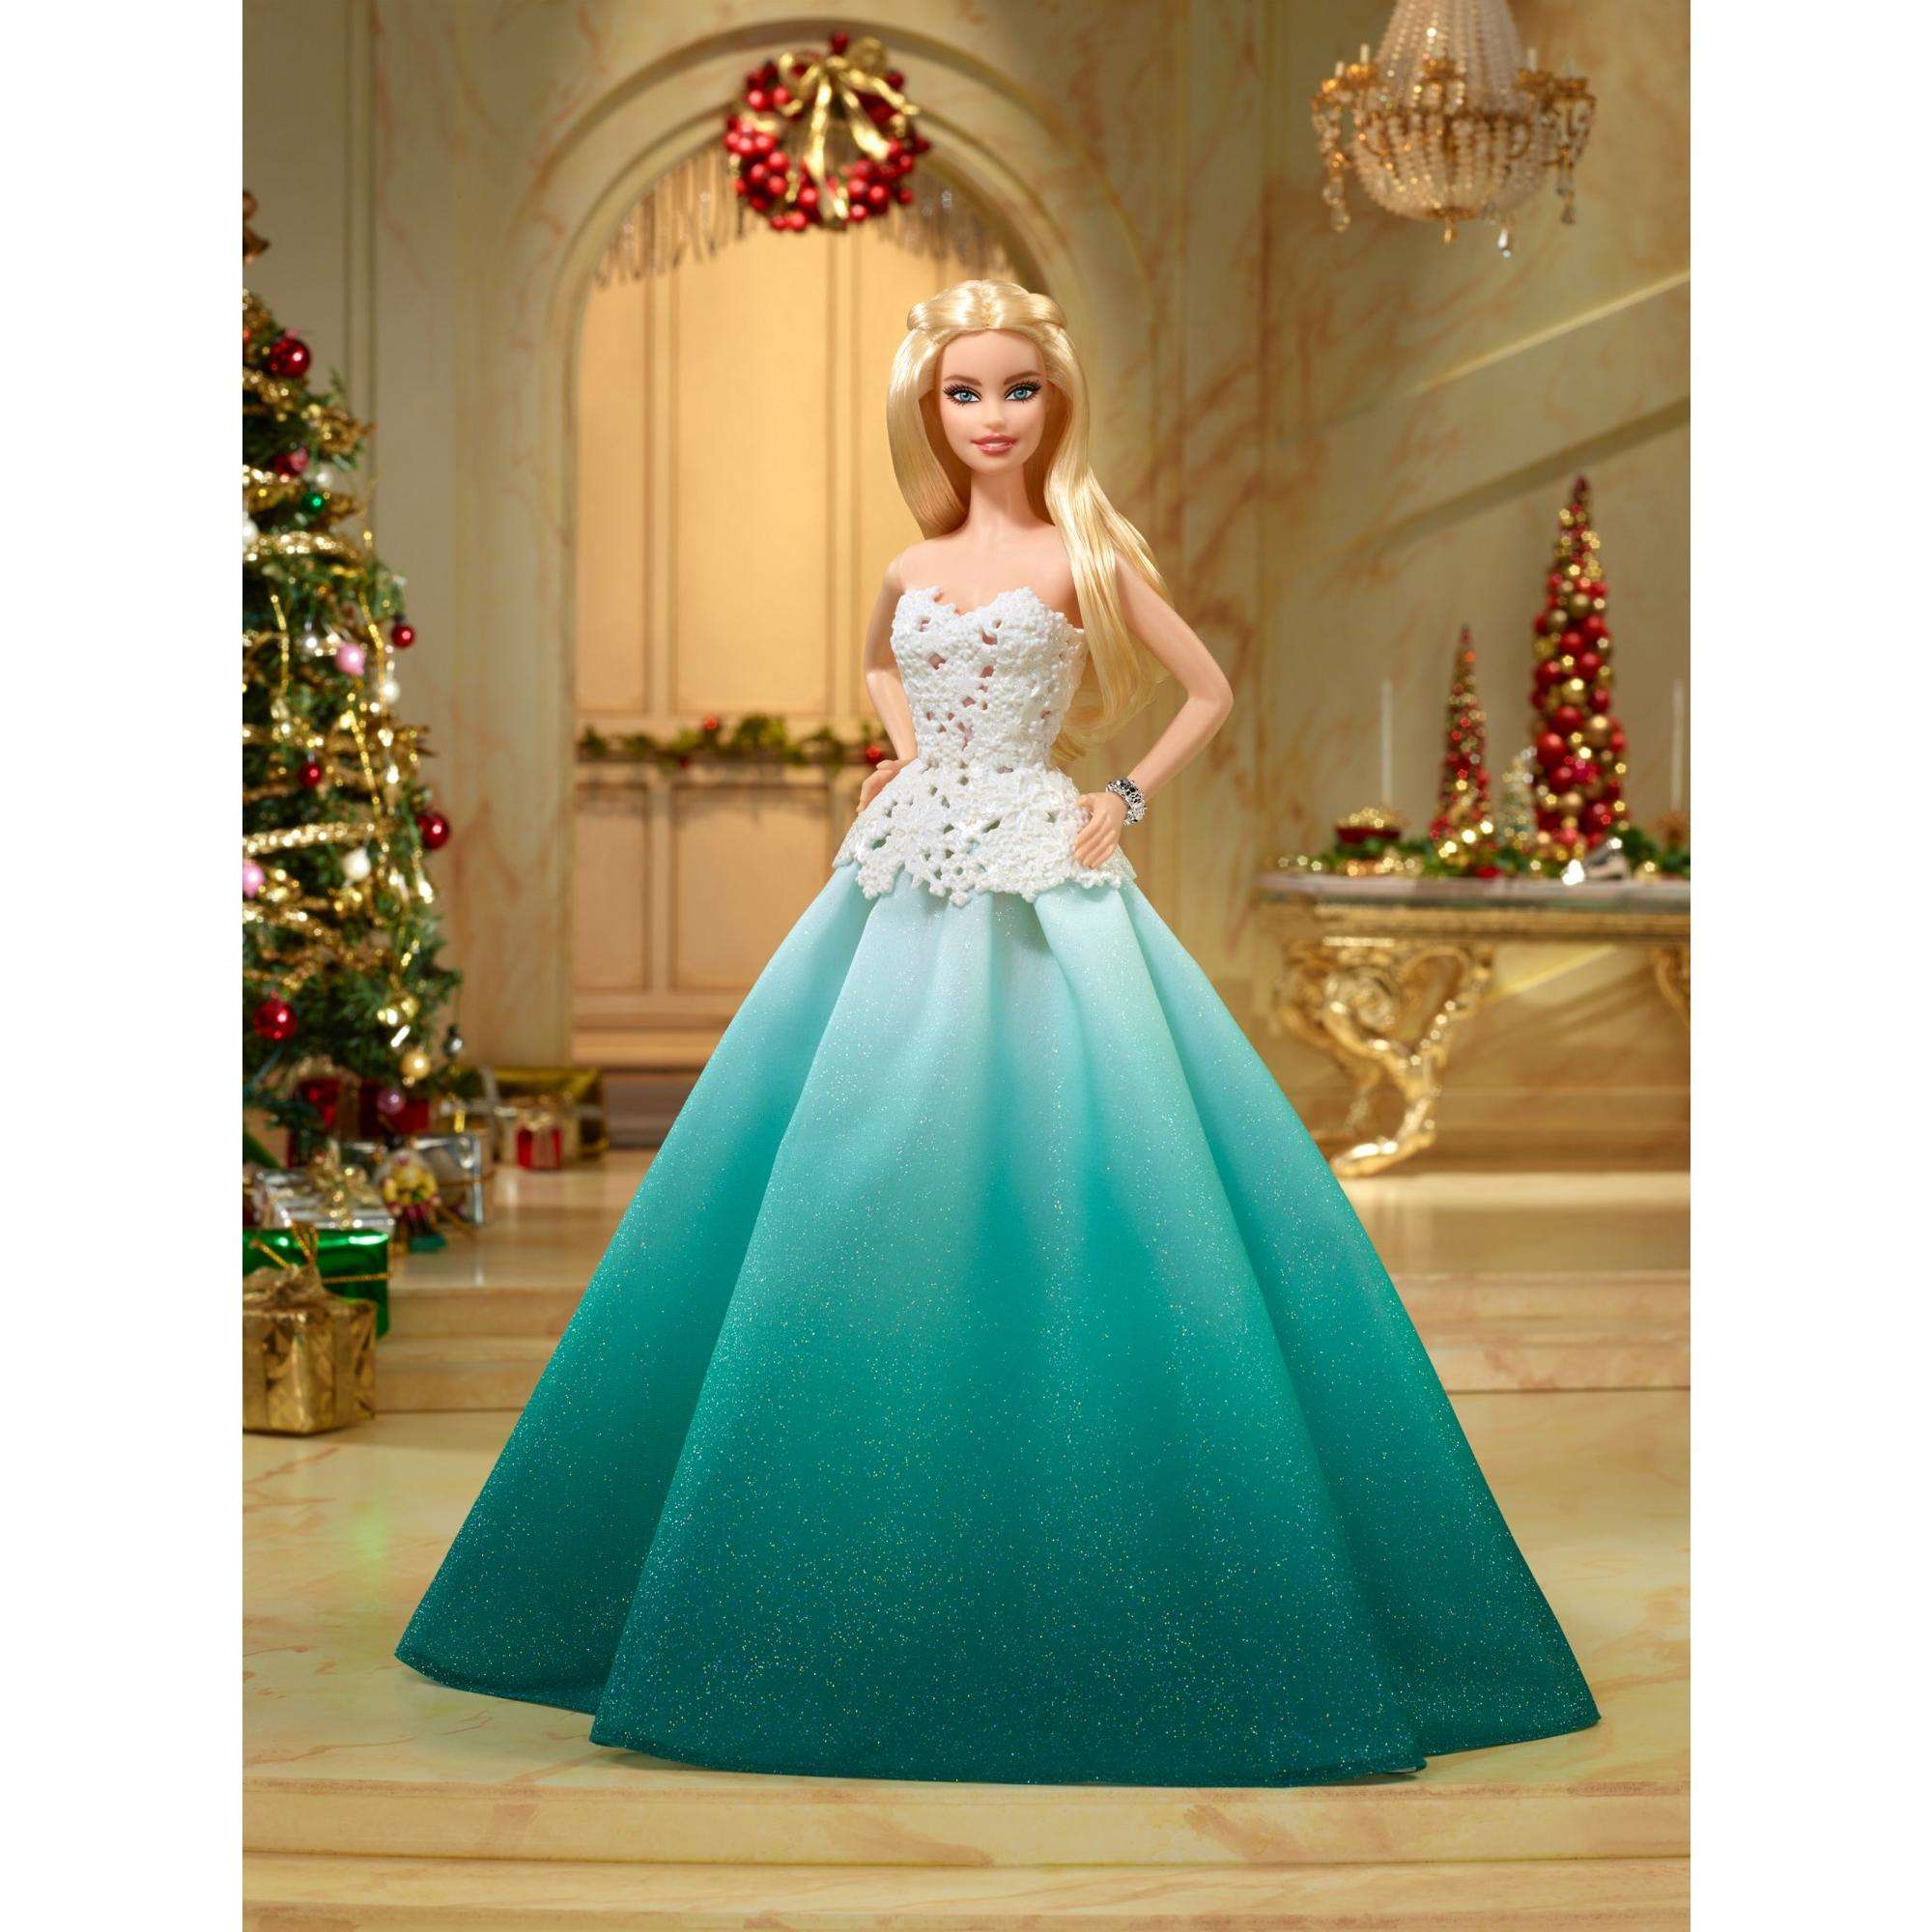 2016 Barbie Collector Holiday Doll with Stand - image 5 of 15